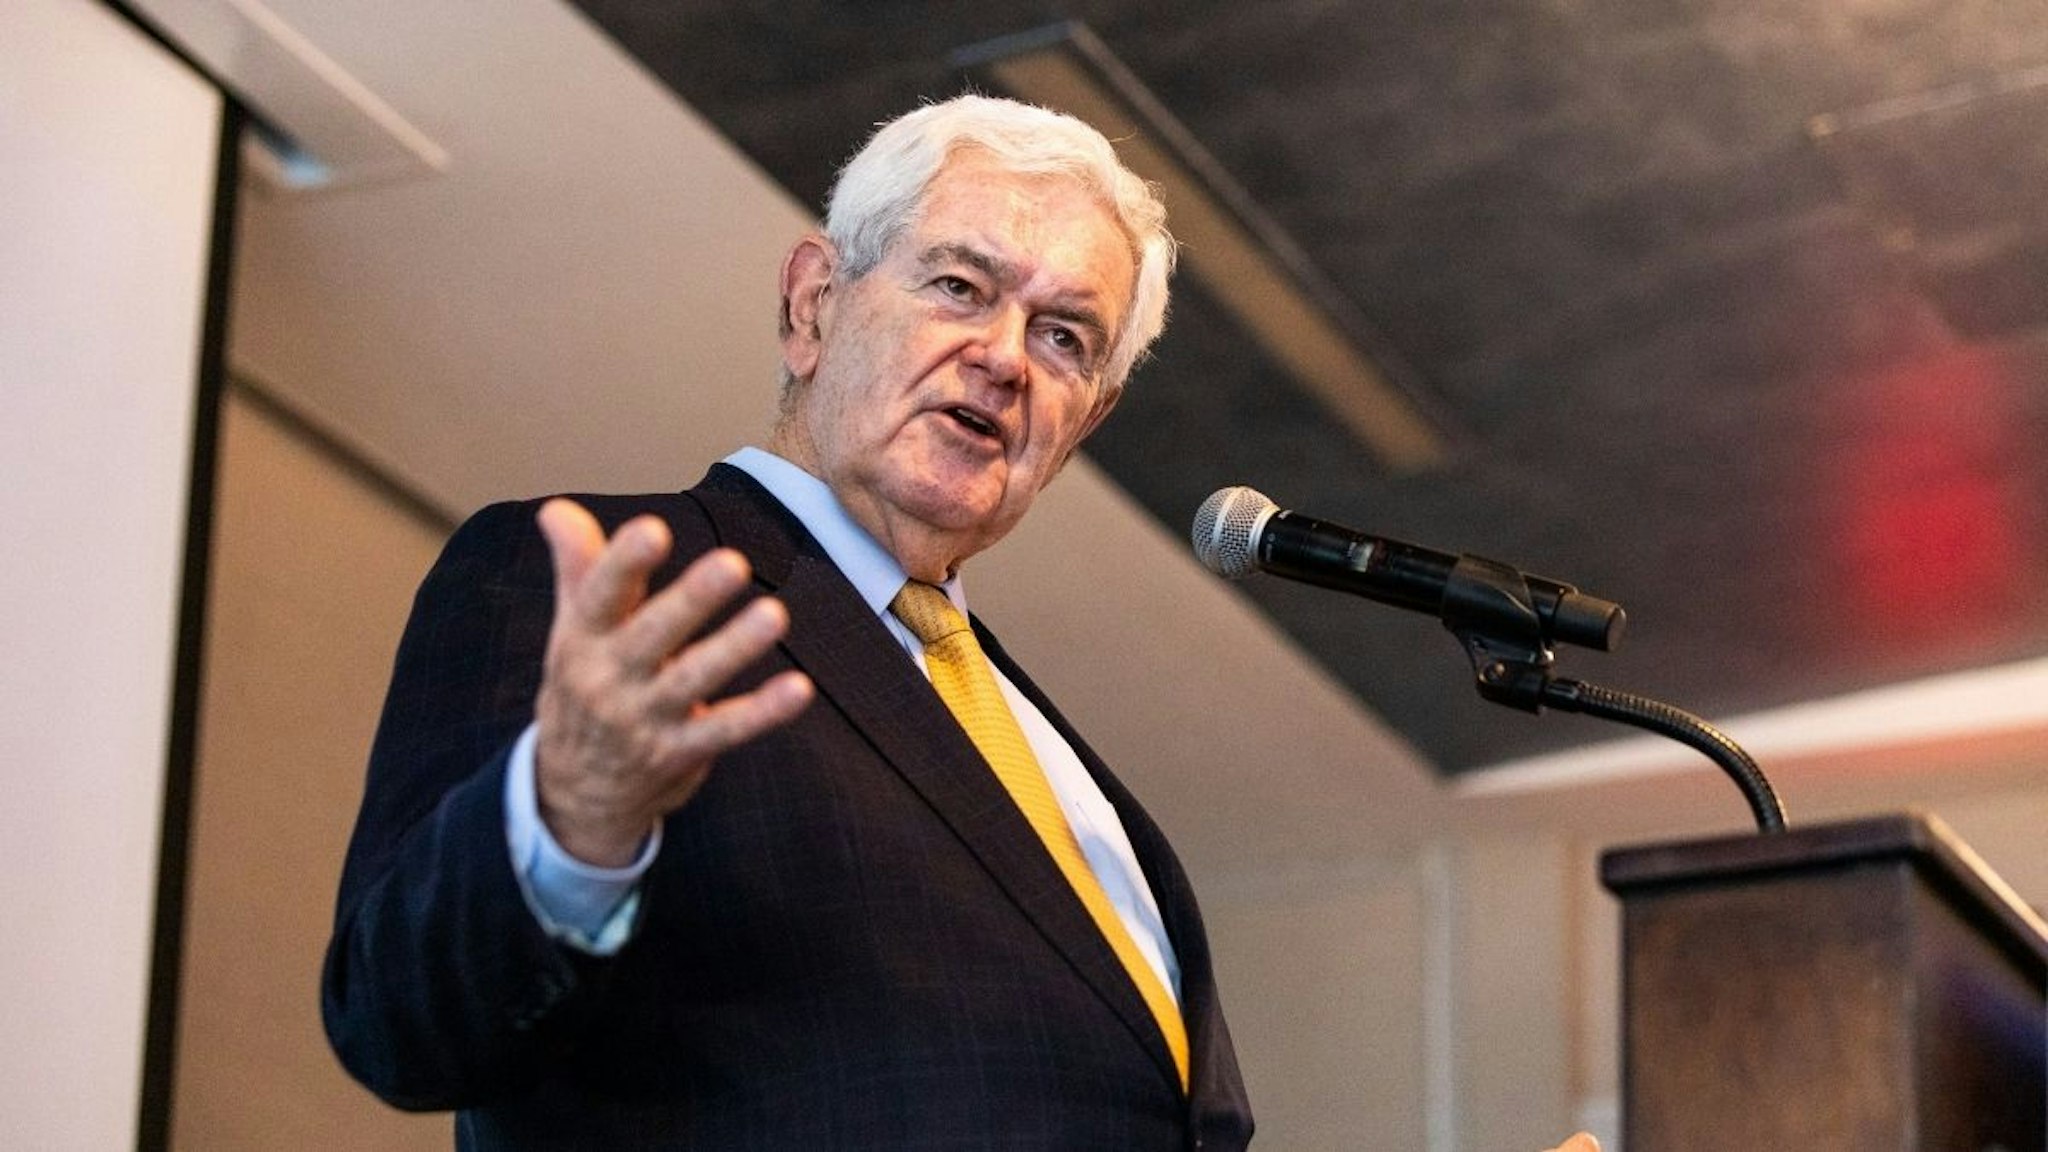 Newt Gingrich, former speaker of the U.S. House of Representatives, speaks during a campaign event for David Perdue, Republican gubernatorial candidate for Georgia, in Duluth, Georgia, U.S., on Tuesday, March 29, 2022.